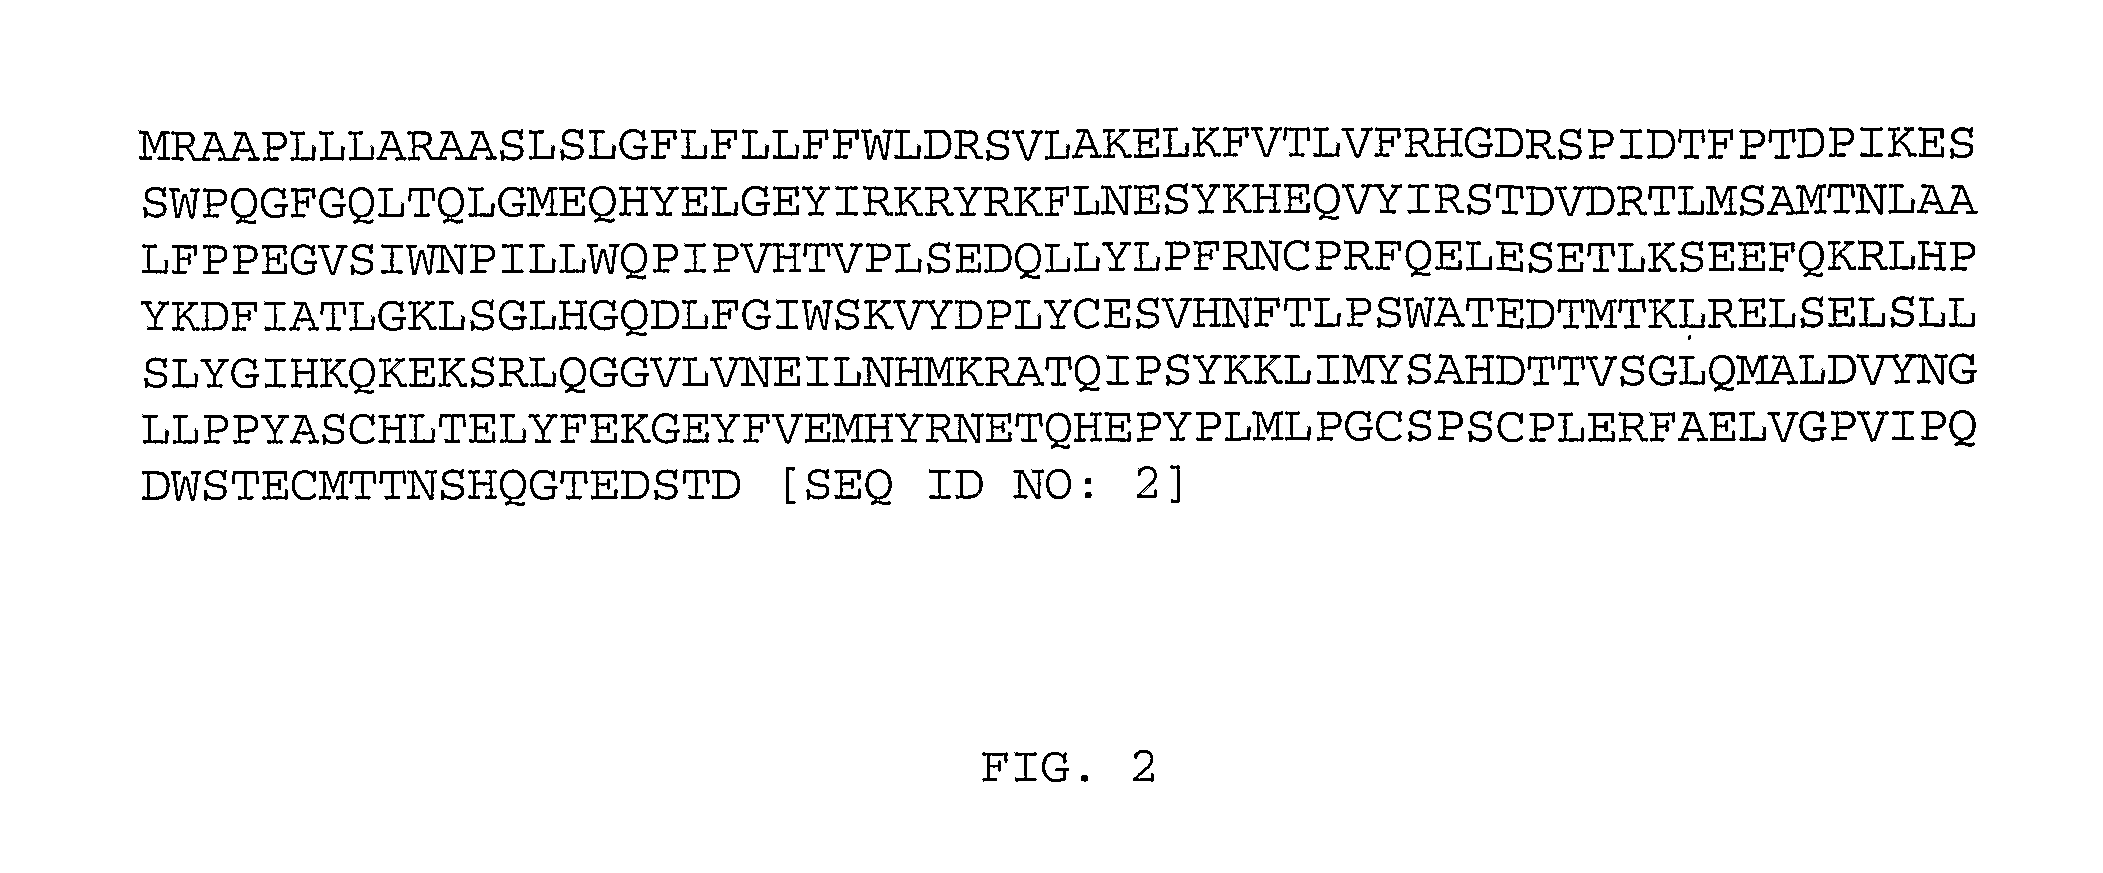 Prostatic Acid Phosphatase (Pap) Materials and Methods of Use Thereof in the Prophylactic and Therapeutic Treatment of Prostate Cancer